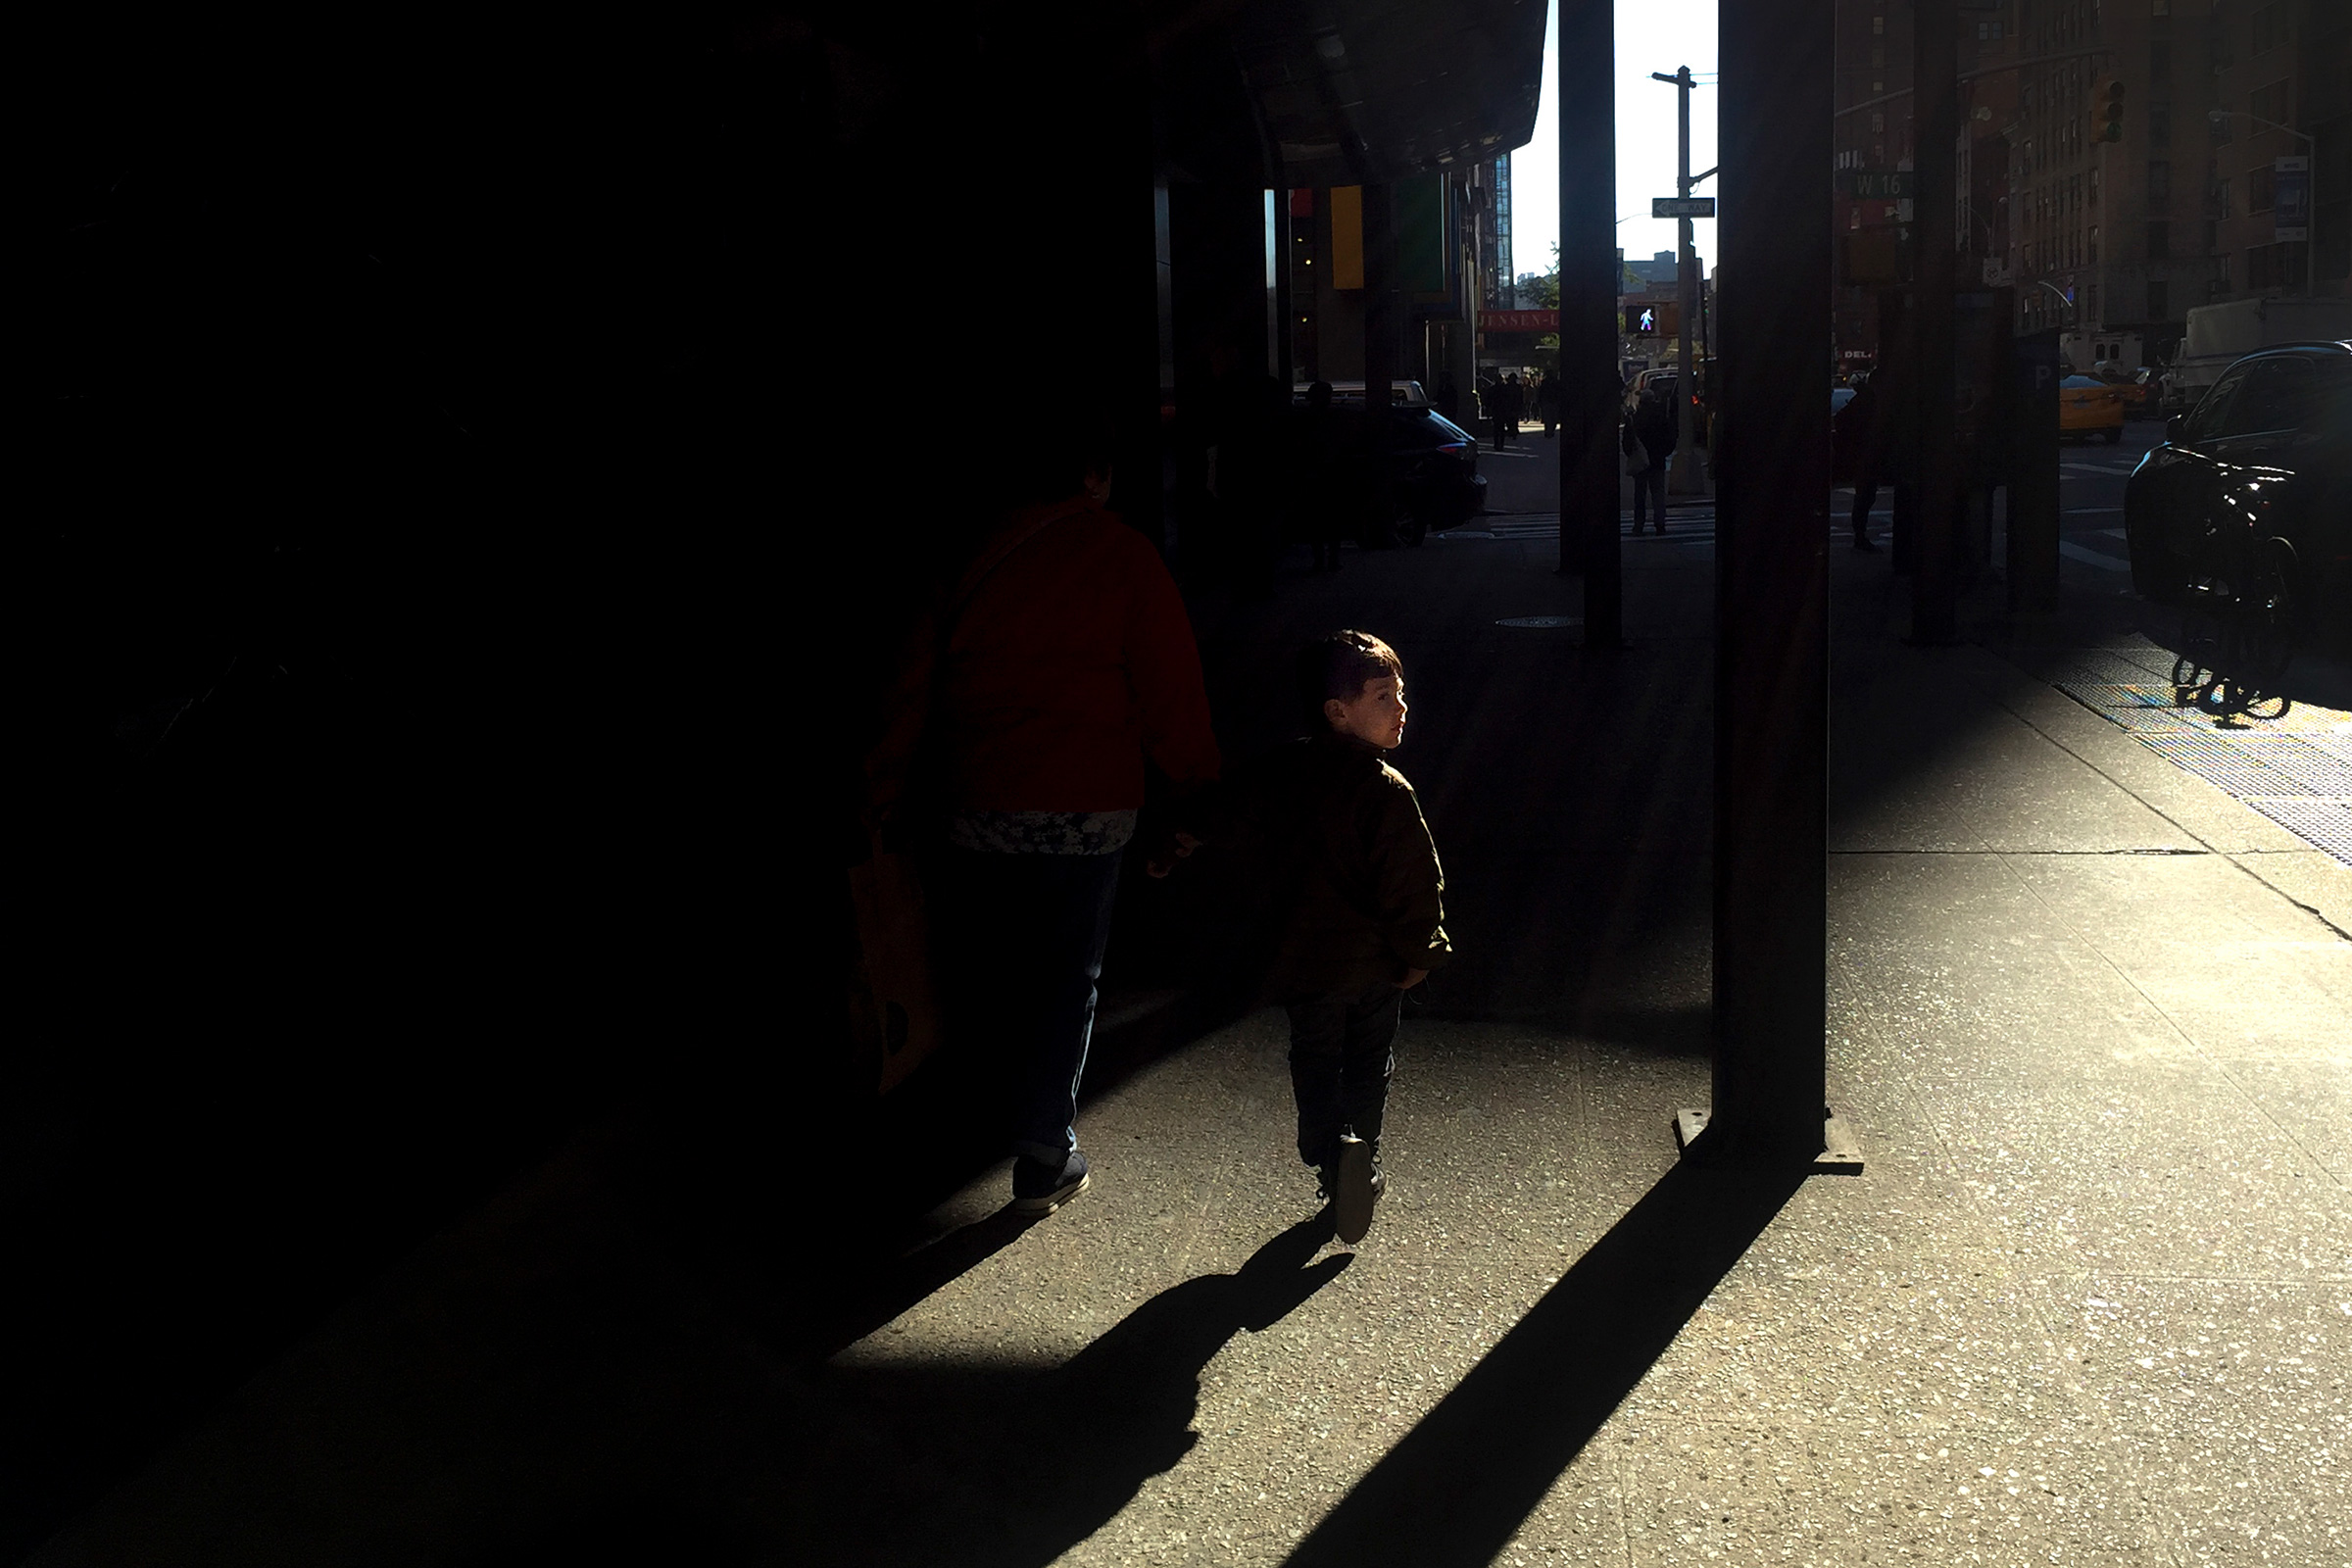 A young boy in New York walks by.